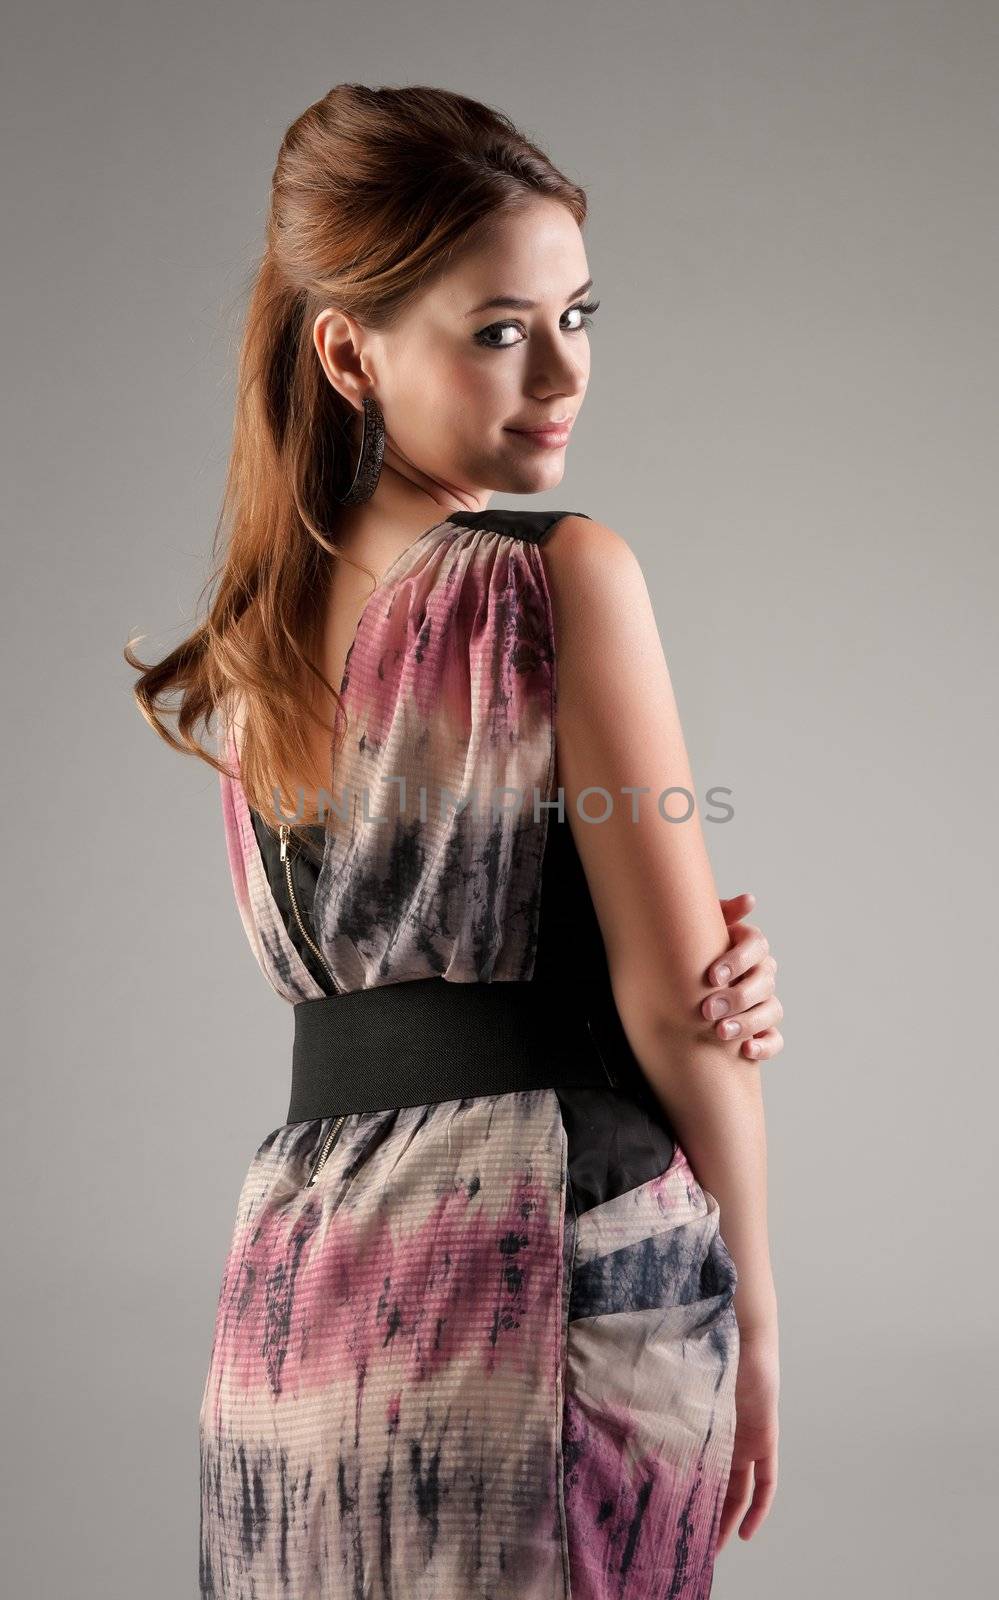 beautiful young fashion model by clearviewstock